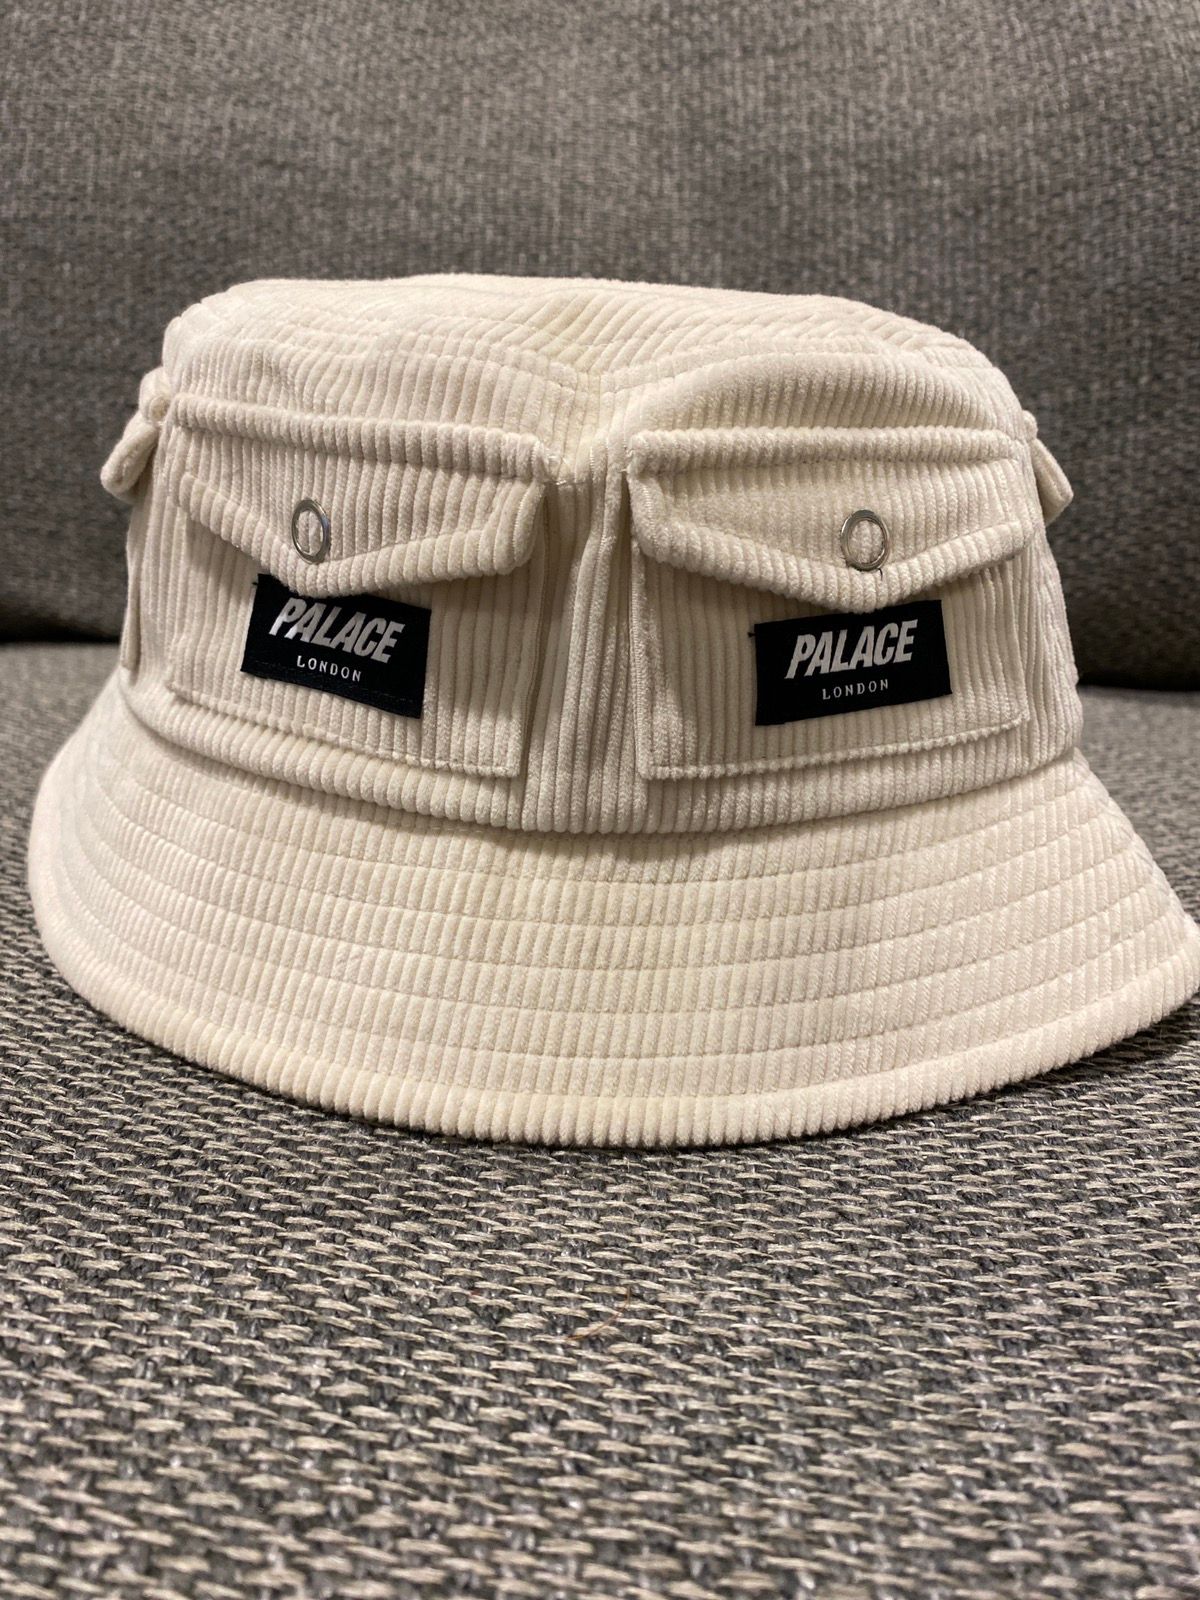 Palace Palace Utility Bucket Hat Size ONE SIZE - 1 Preview